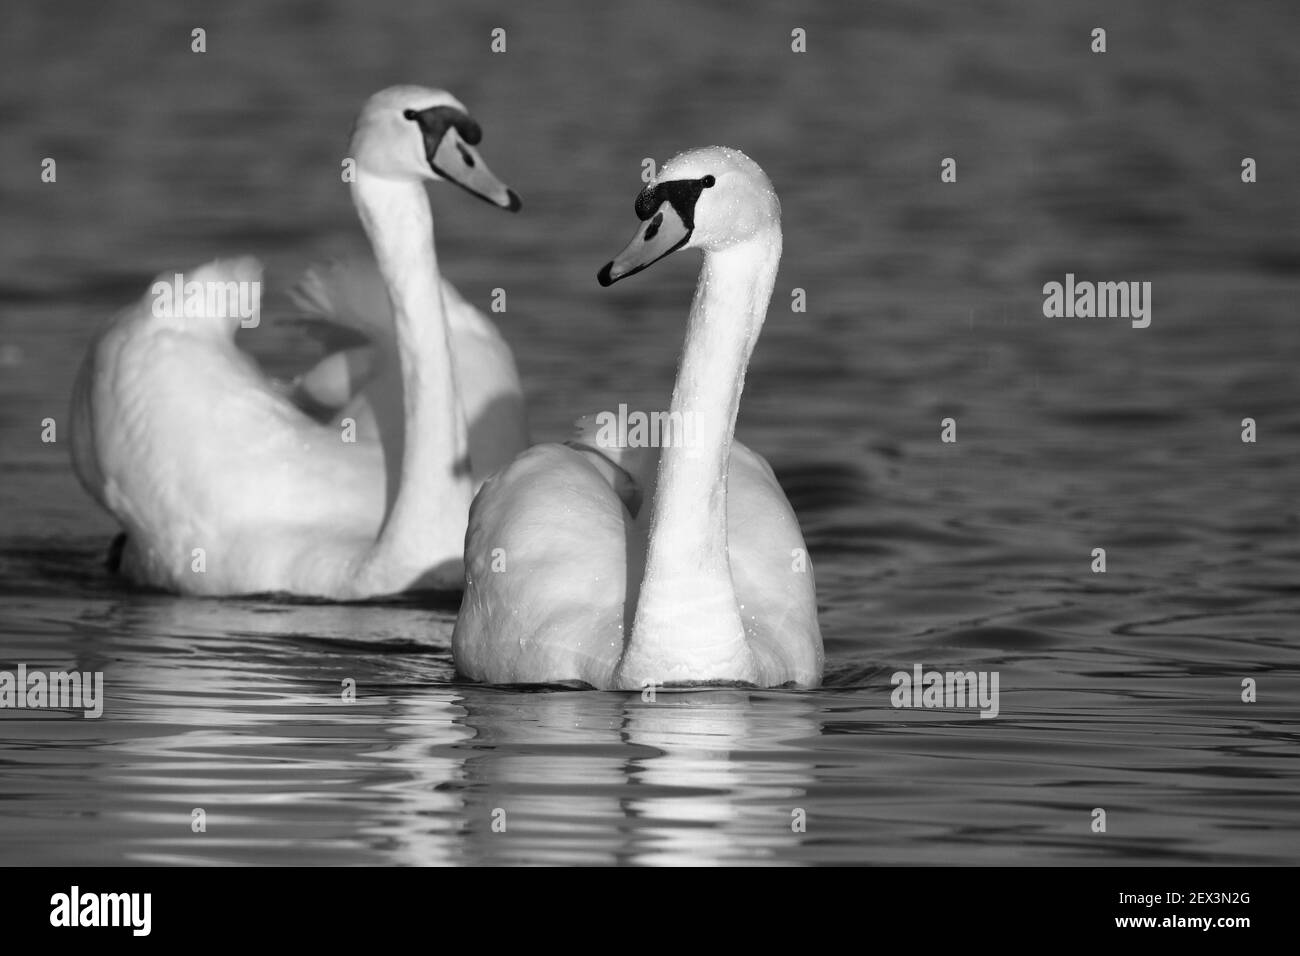 Mute swans on the lake, black and white photo Stock Photo